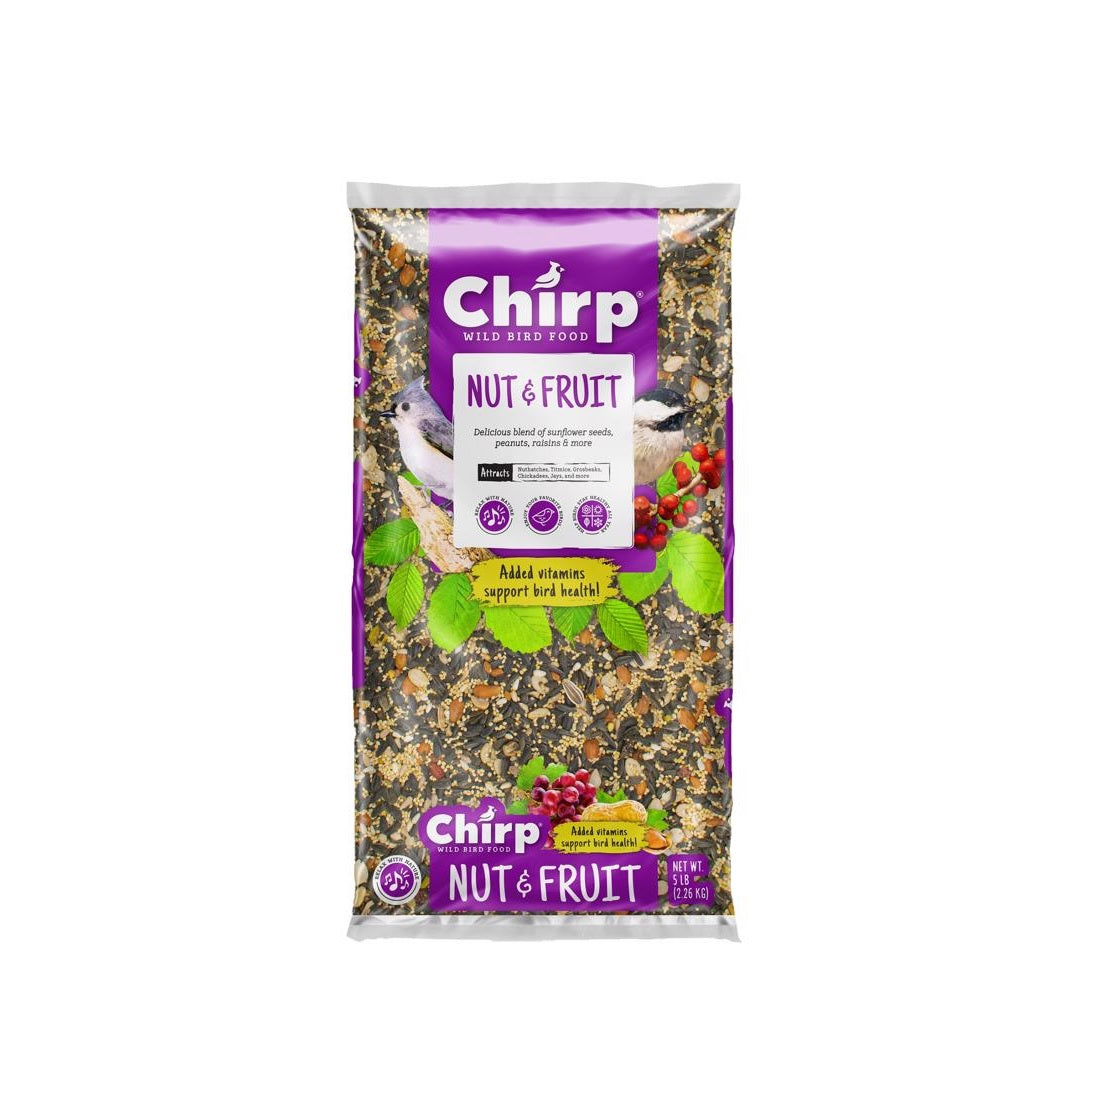 Chirp 14977 Fruits and Nuts Wild Bird Food, 5 lb